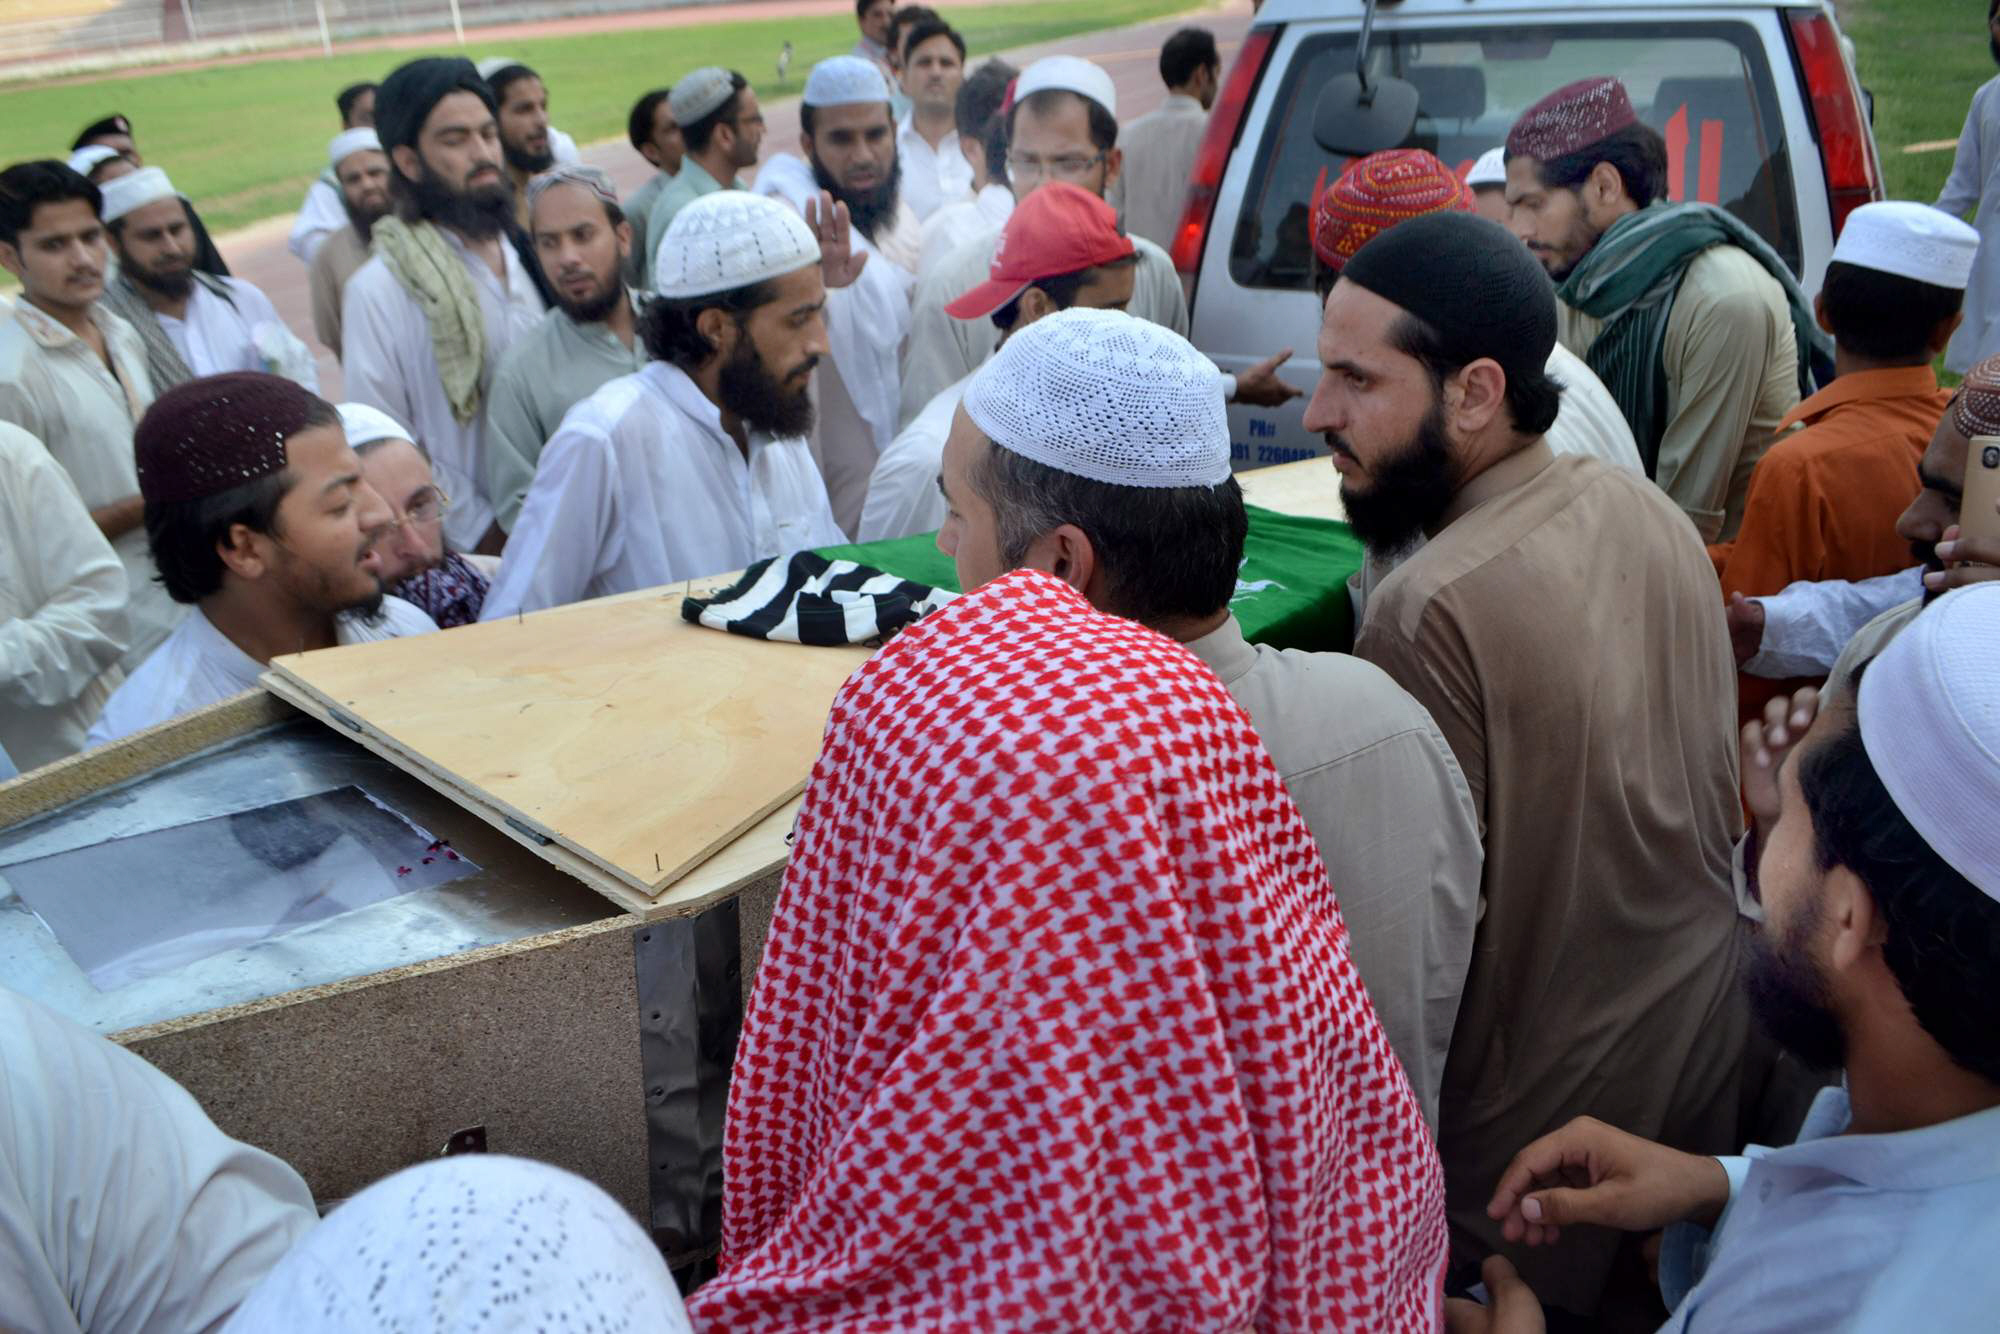 body of aswj 039 s spokesperson maulana saeed farooqui arrives in his home town of mohmand on monday after he was gunned down on sunday photo iqbal haider express